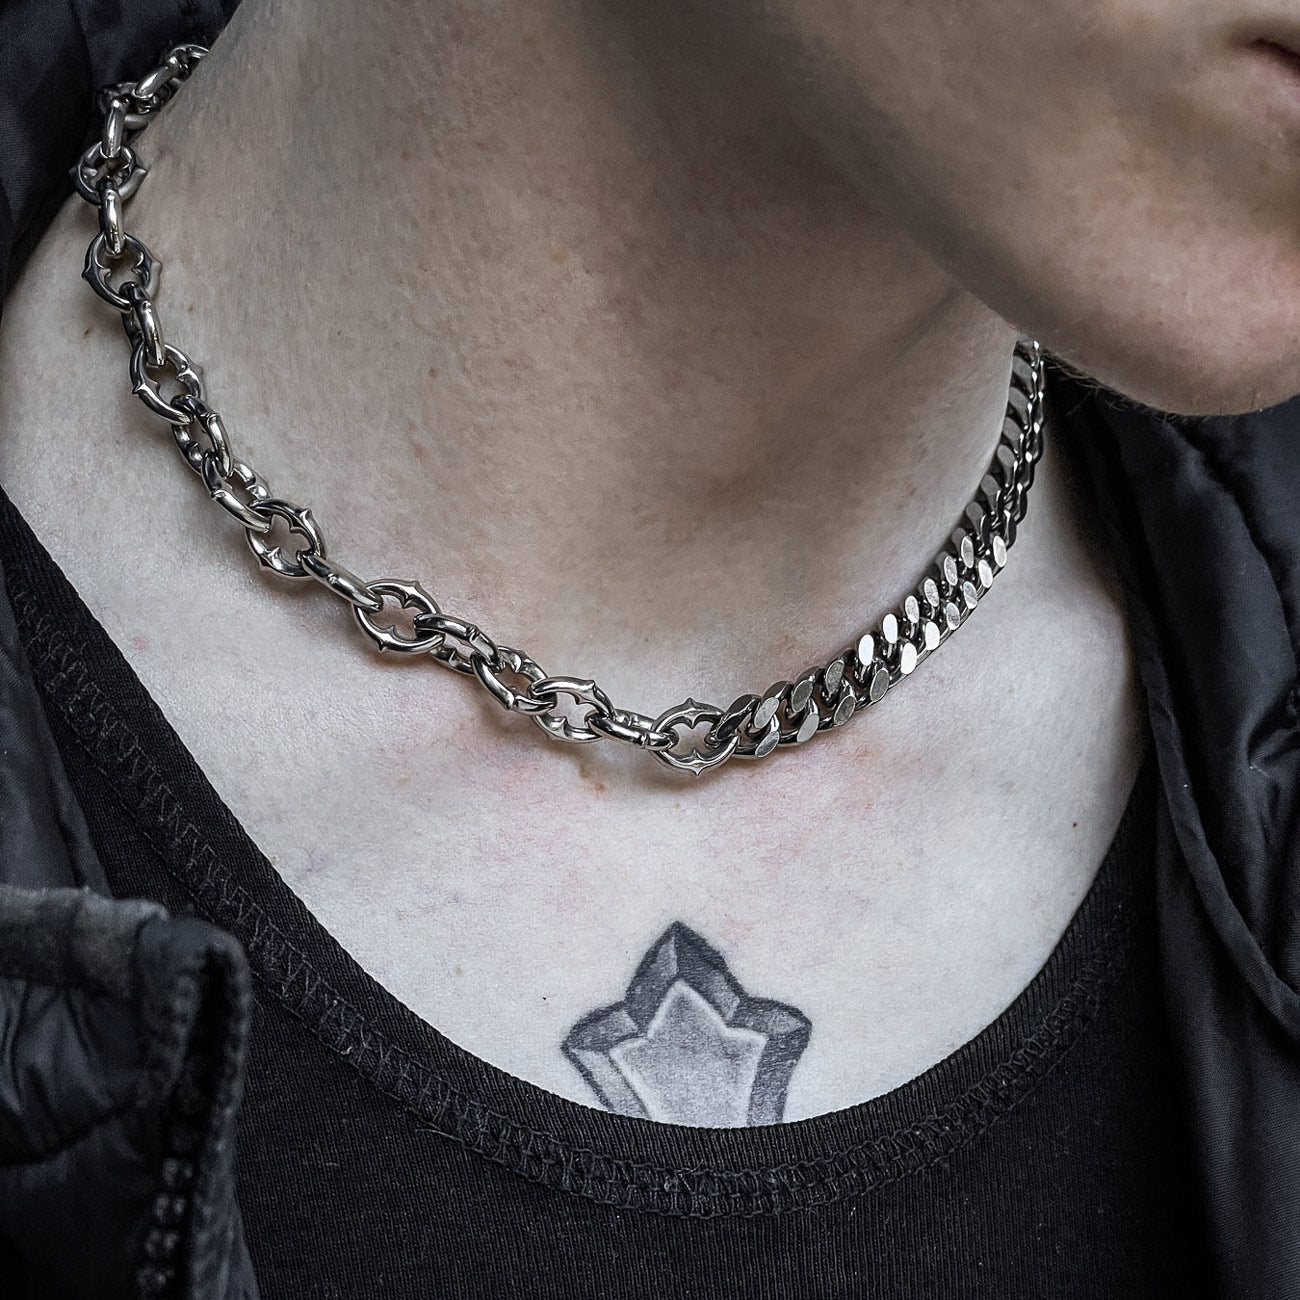 Statement Collective - “Split” Cathedral Link Spiked Chain (Adjustable)